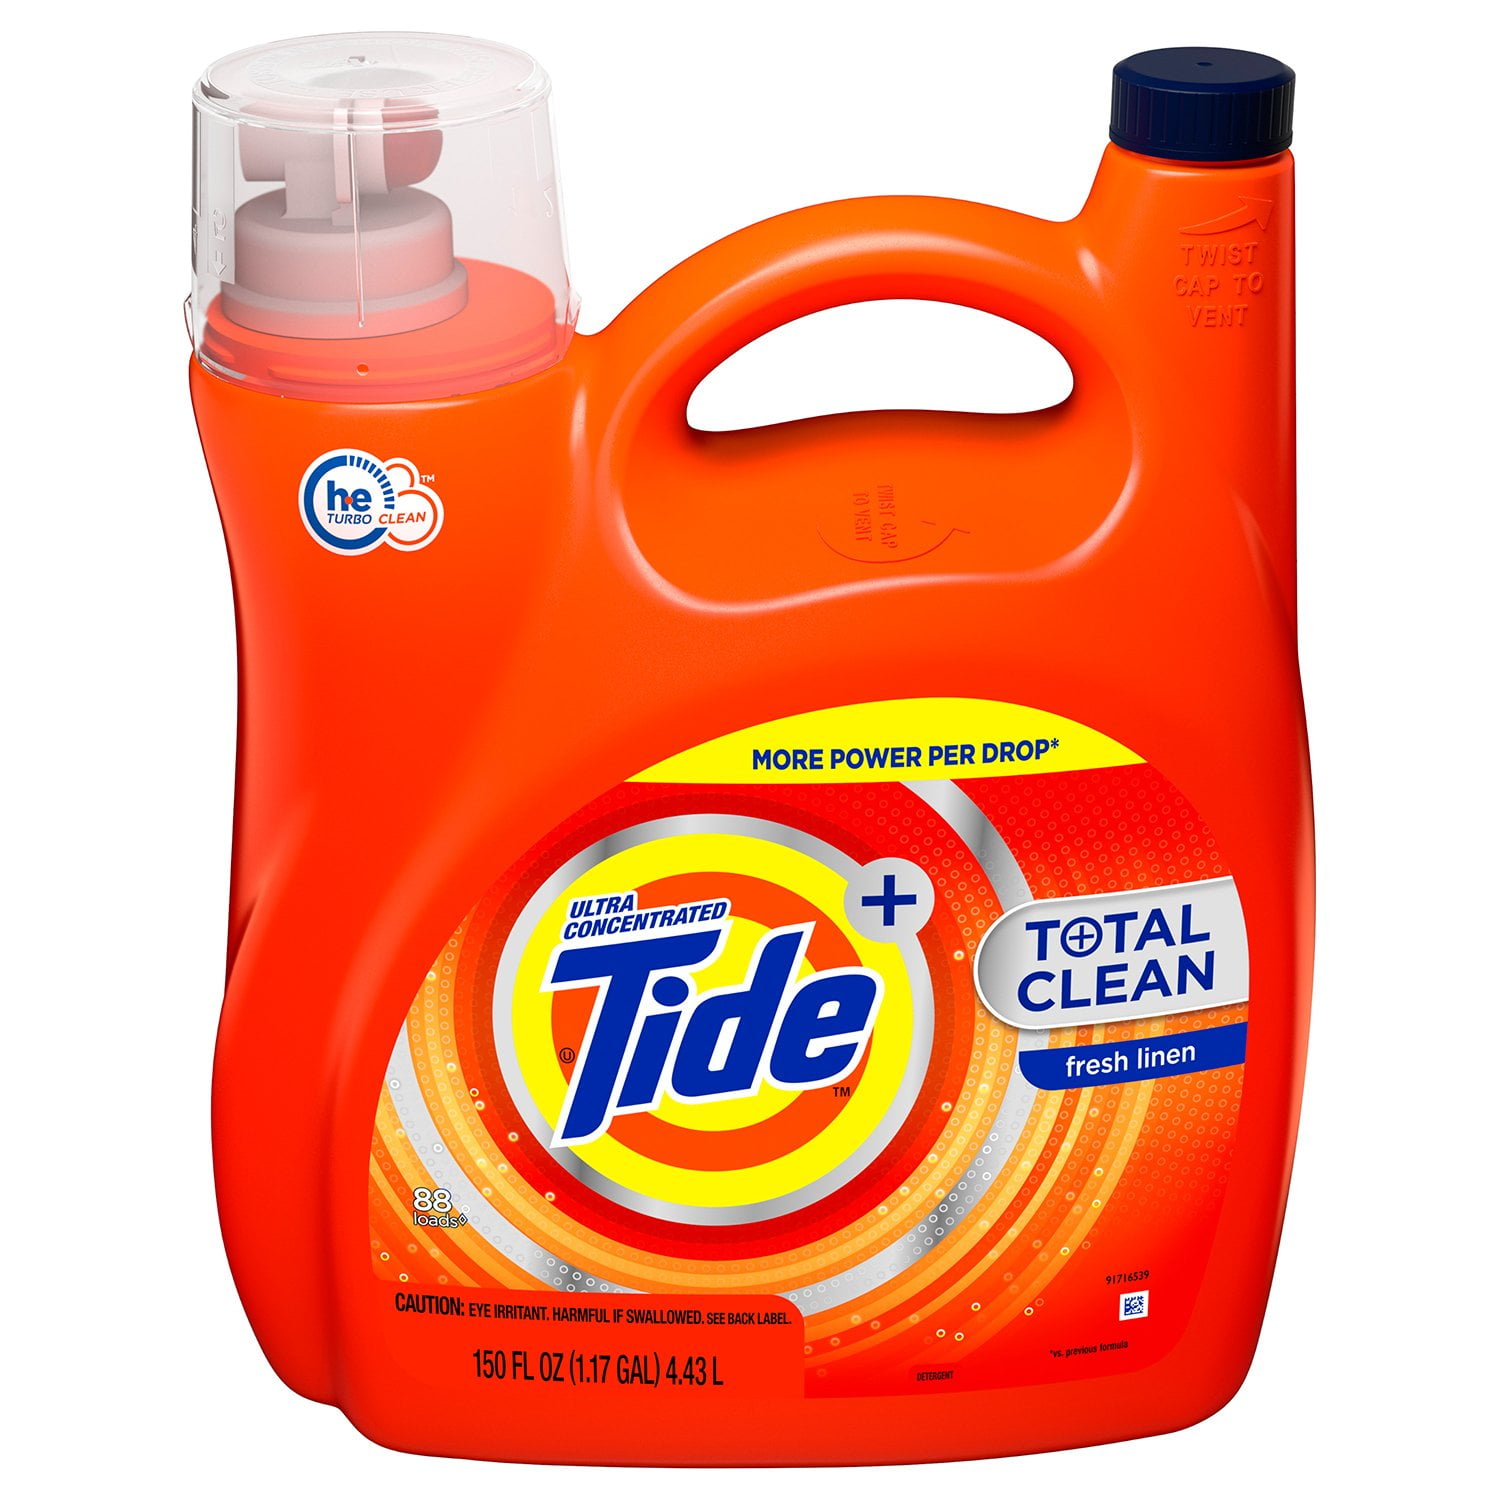 Total cleaning. Ultra concentrated Detergent. Тотал Клин. Tide 2в1. Power clean стирка.